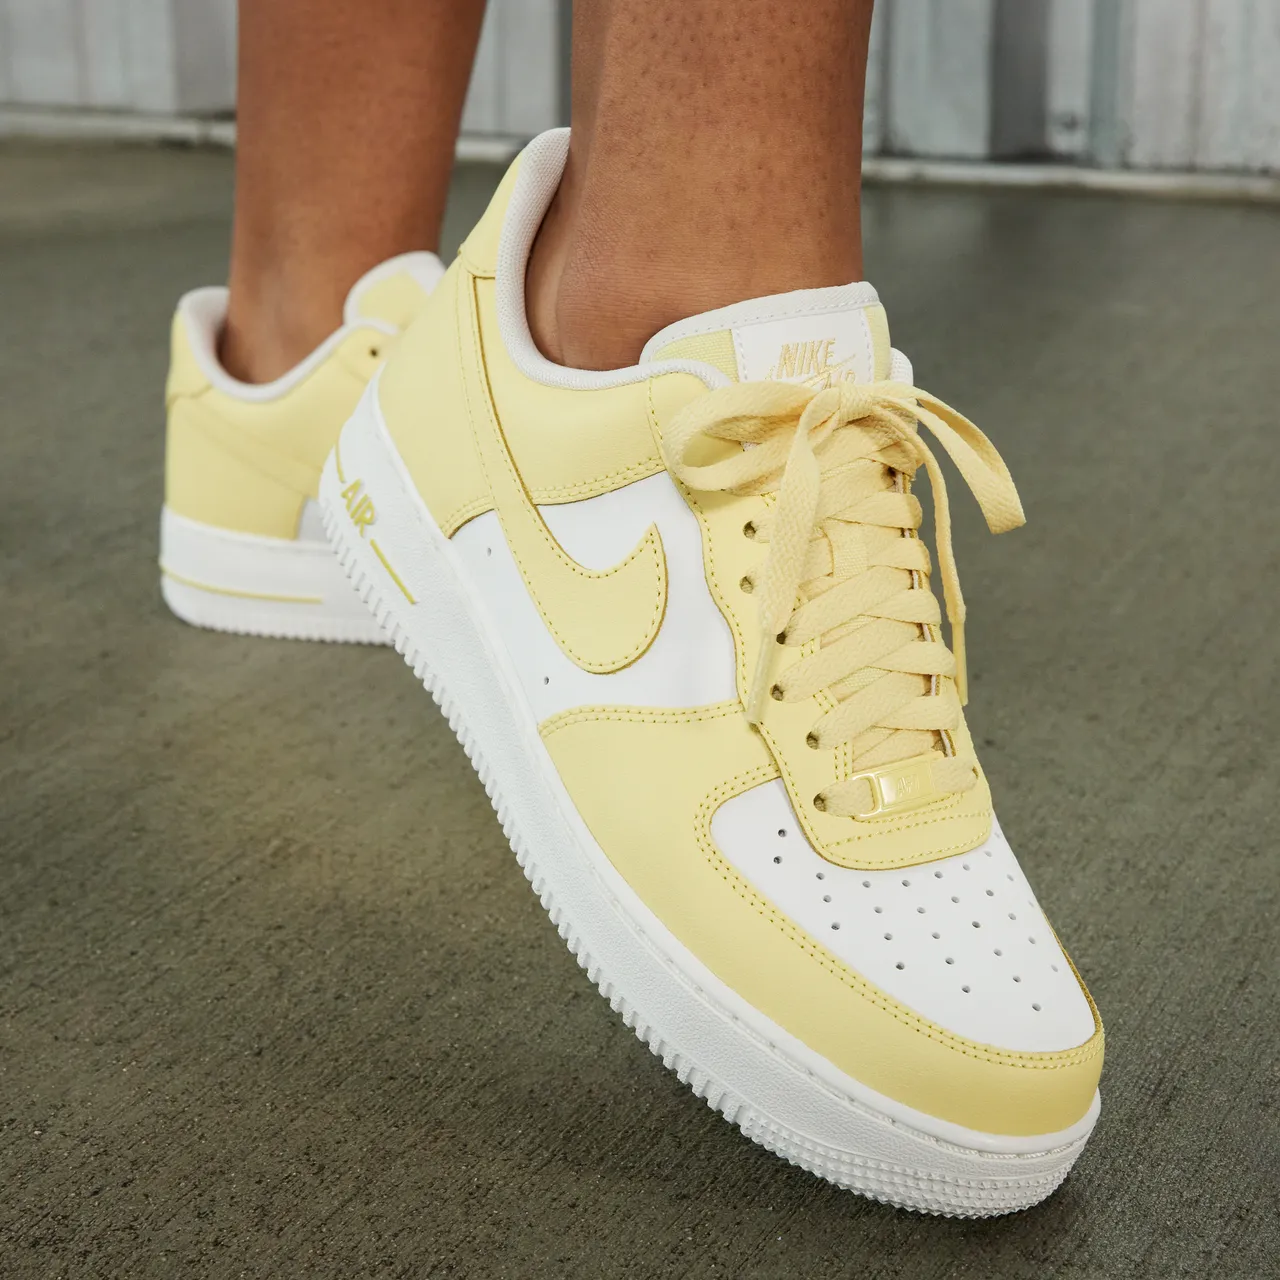 Nike Air Force 1 '07 Women's Shoes - Yellow - Leather